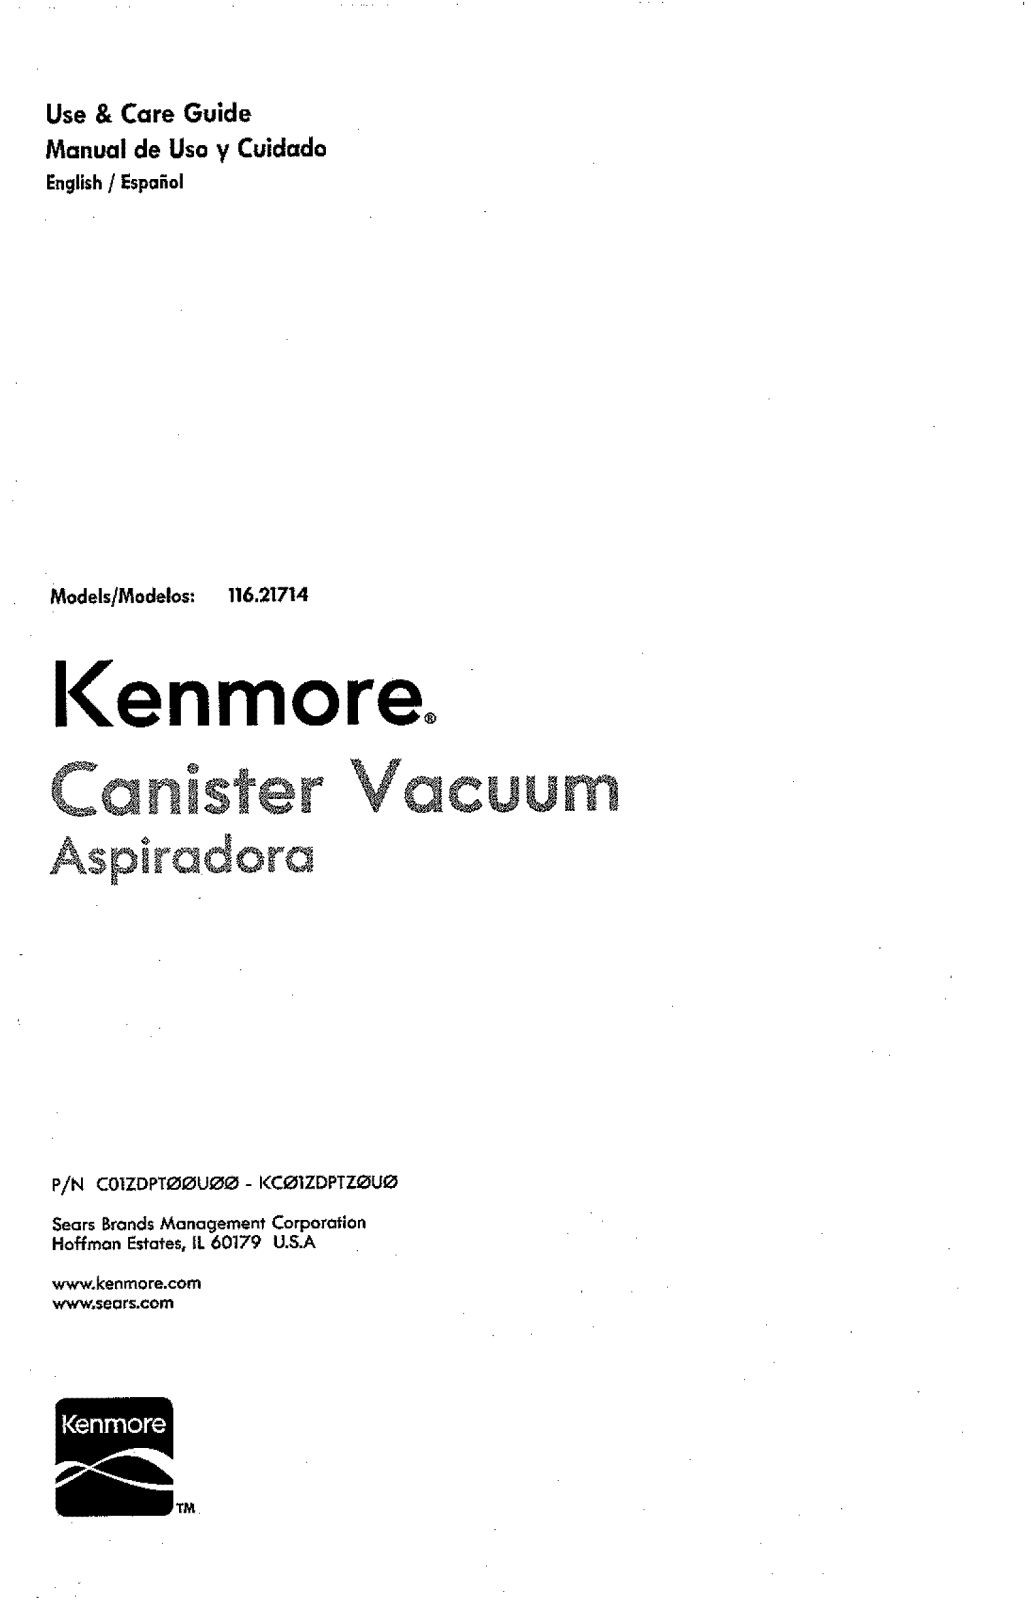 Kenmore 21714, Progressive Canister Vacuum Cleaner - Red Owner's Manual